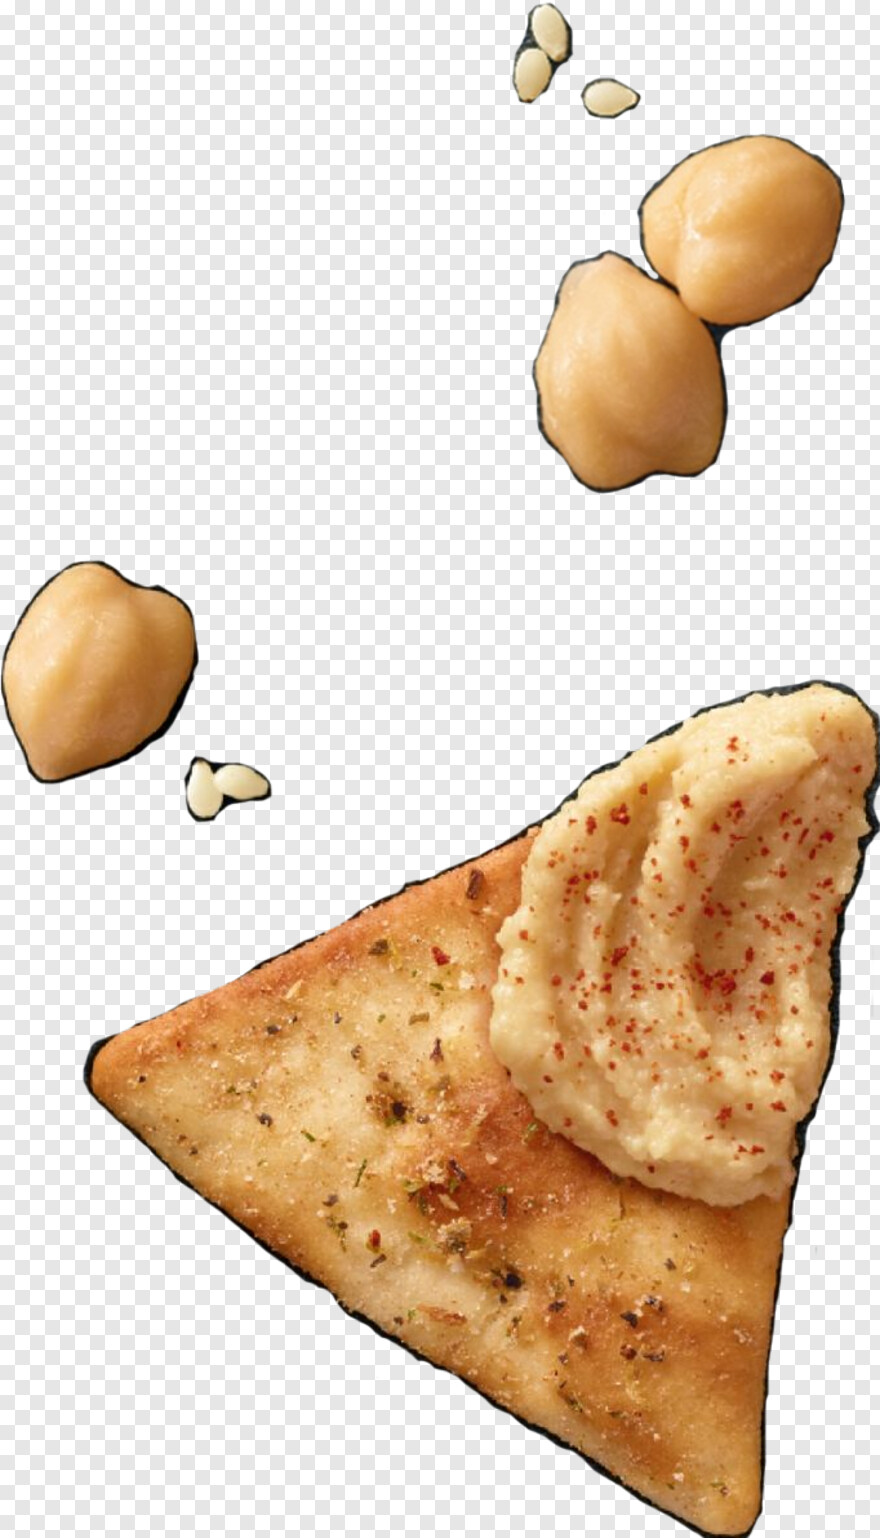 crackers-clipart # 948635